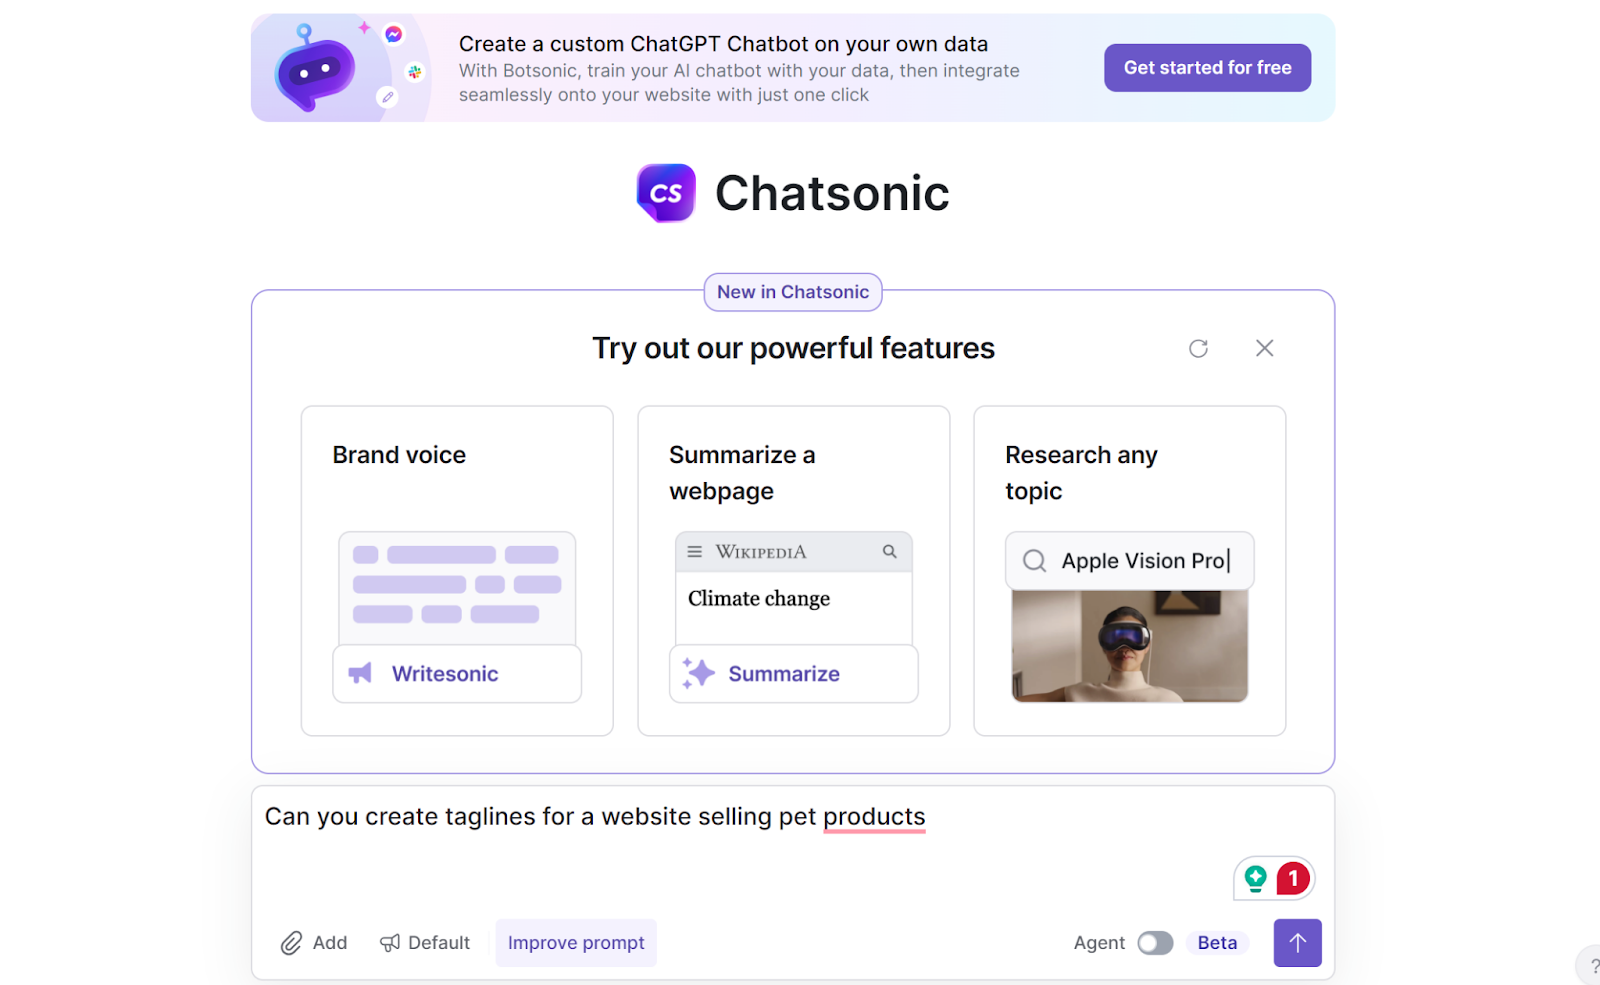 Chatsonic example for taglines